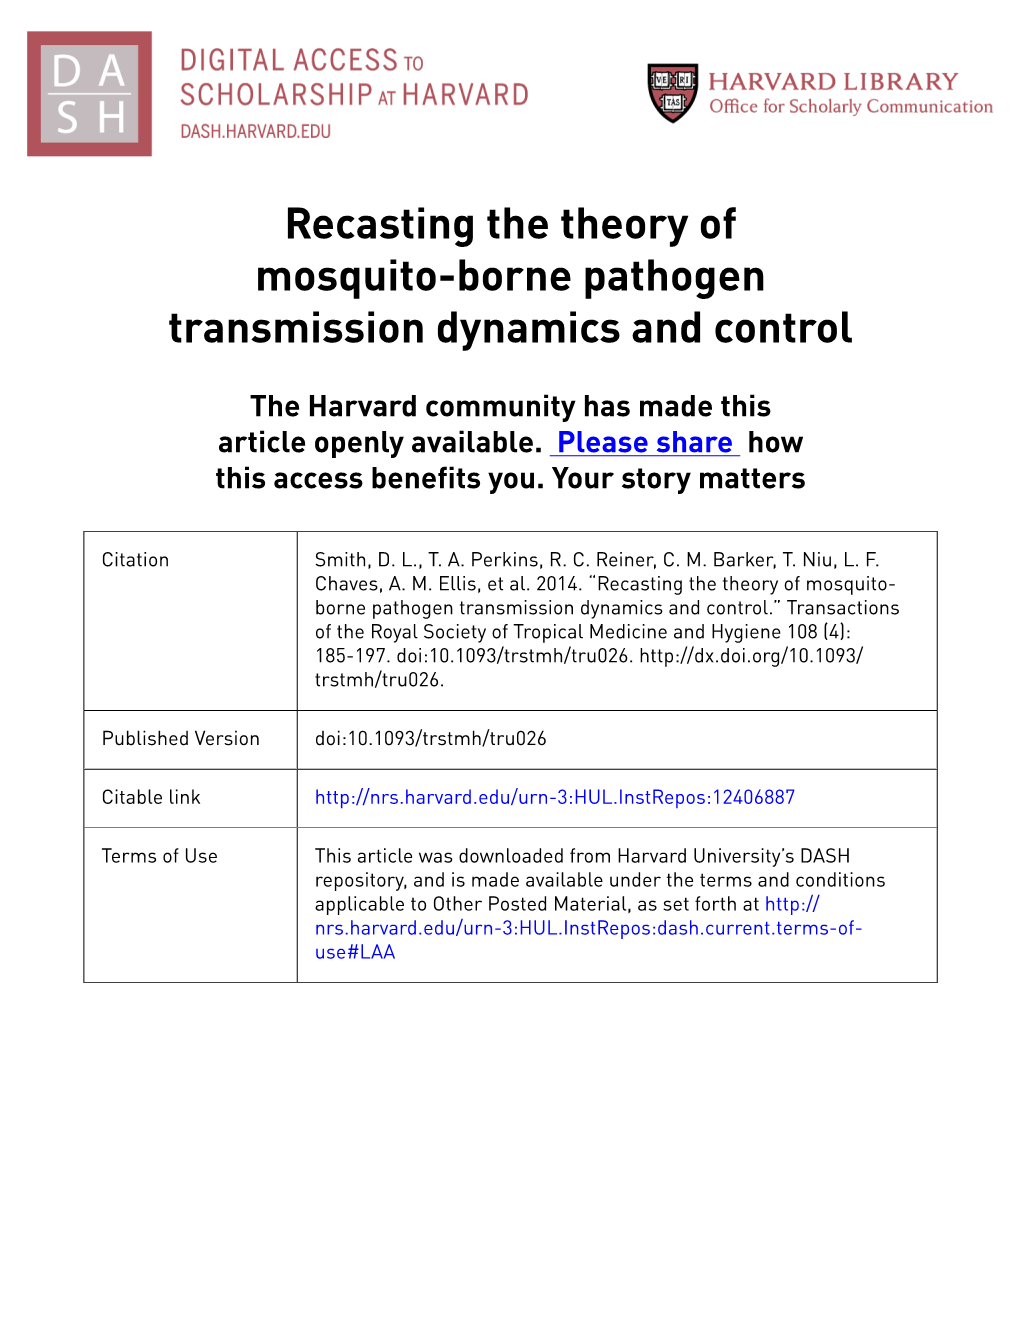 Recasting the Theory of Mosquito-Borne Pathogen Transmission Dynamics and Control